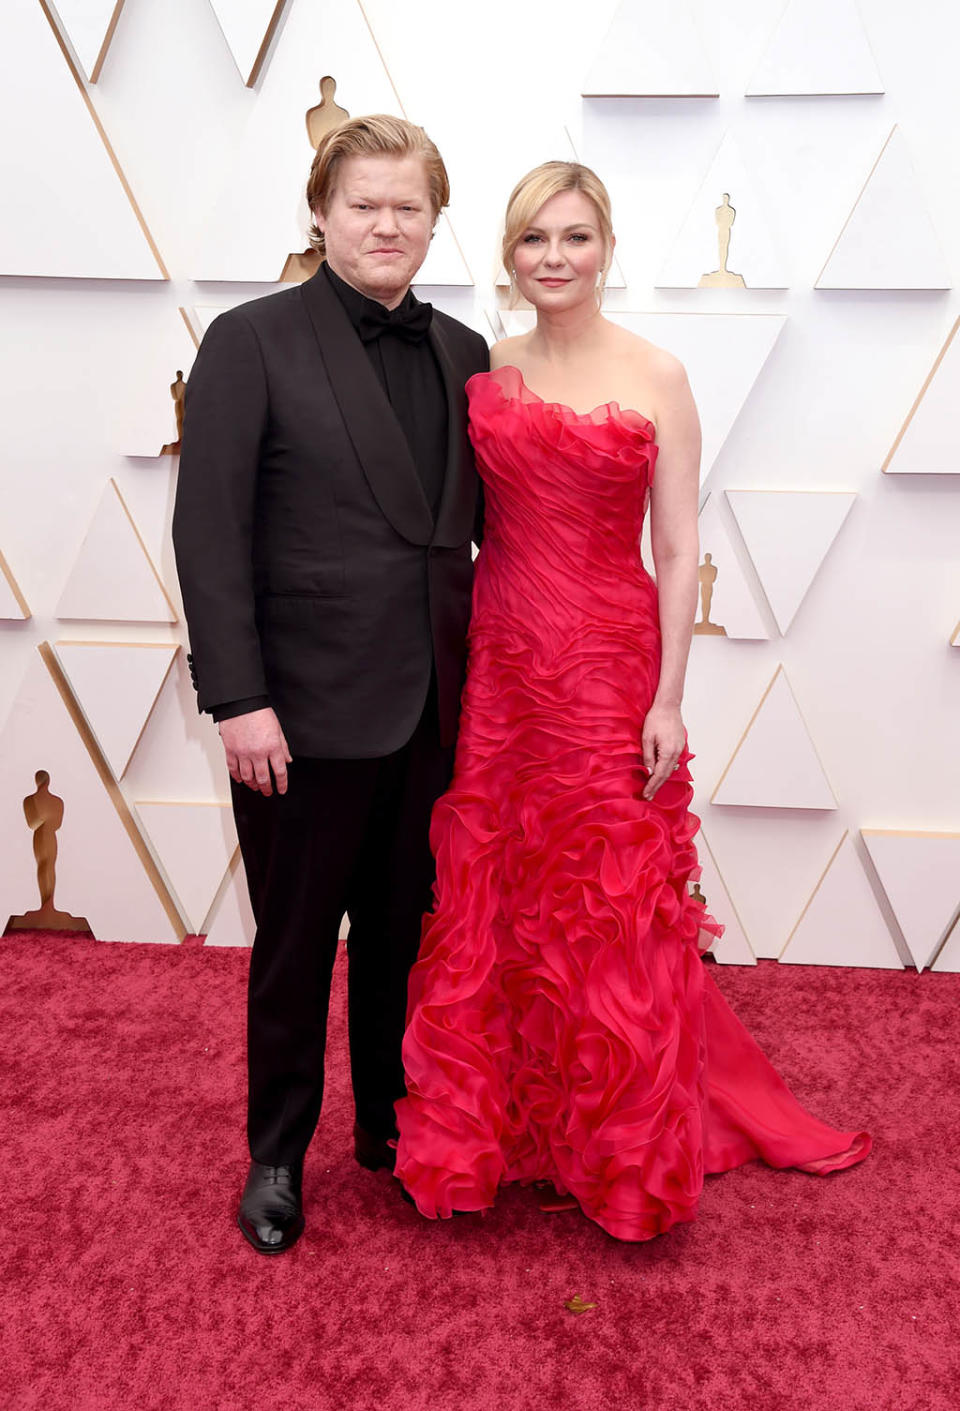 Kirsten Dunst and her fiancé Jesse Plemons at the 94th Academy Awards on March 27th, 2022 in Los Angeles. - Credit: Gilbert Flores for Variety